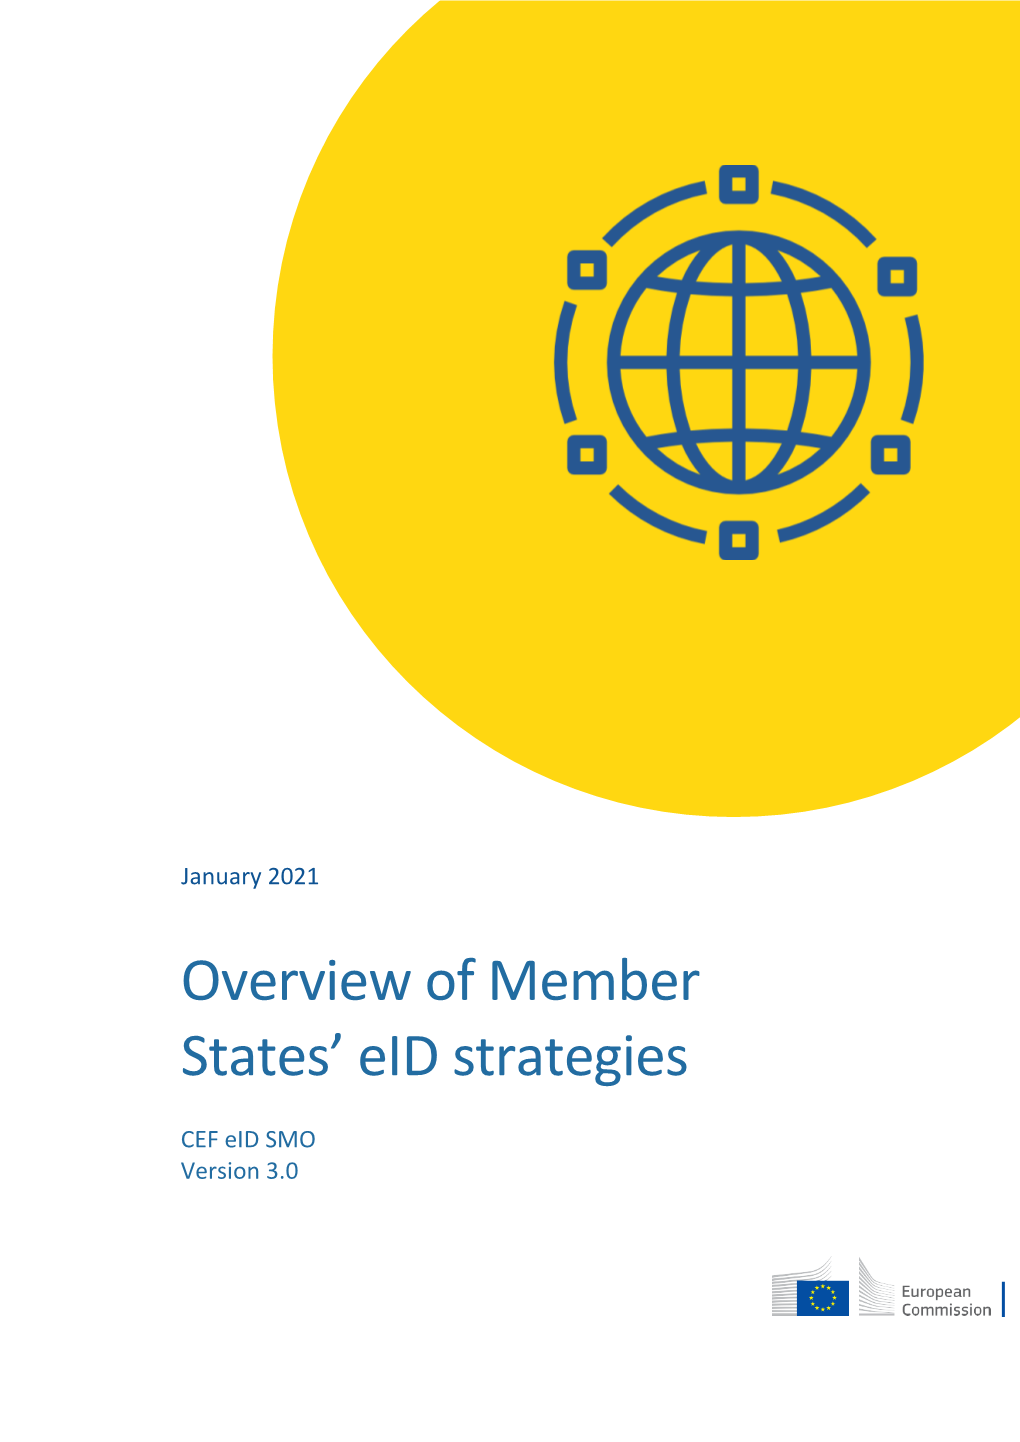 Overview of Member States' Eid Strategies